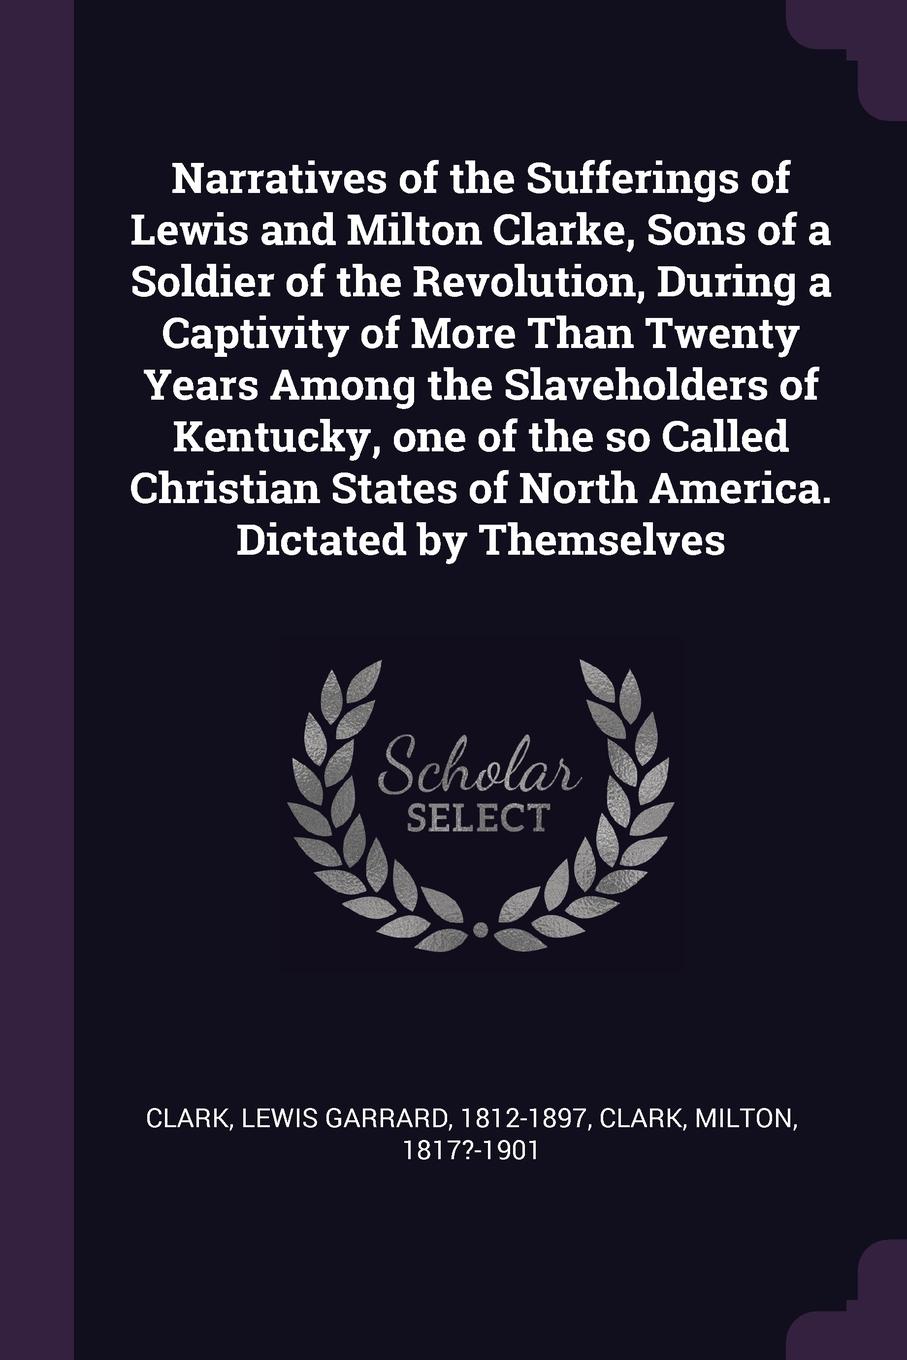 Narratives of the Sufferings of Lewis and Milton Clarke, Sons of a Soldier of the Revolution, During a Captivity of More Than Twenty Years Among the Slaveholders of Kentucky, one of the so Called Christian States of North America. Dictated by Them...